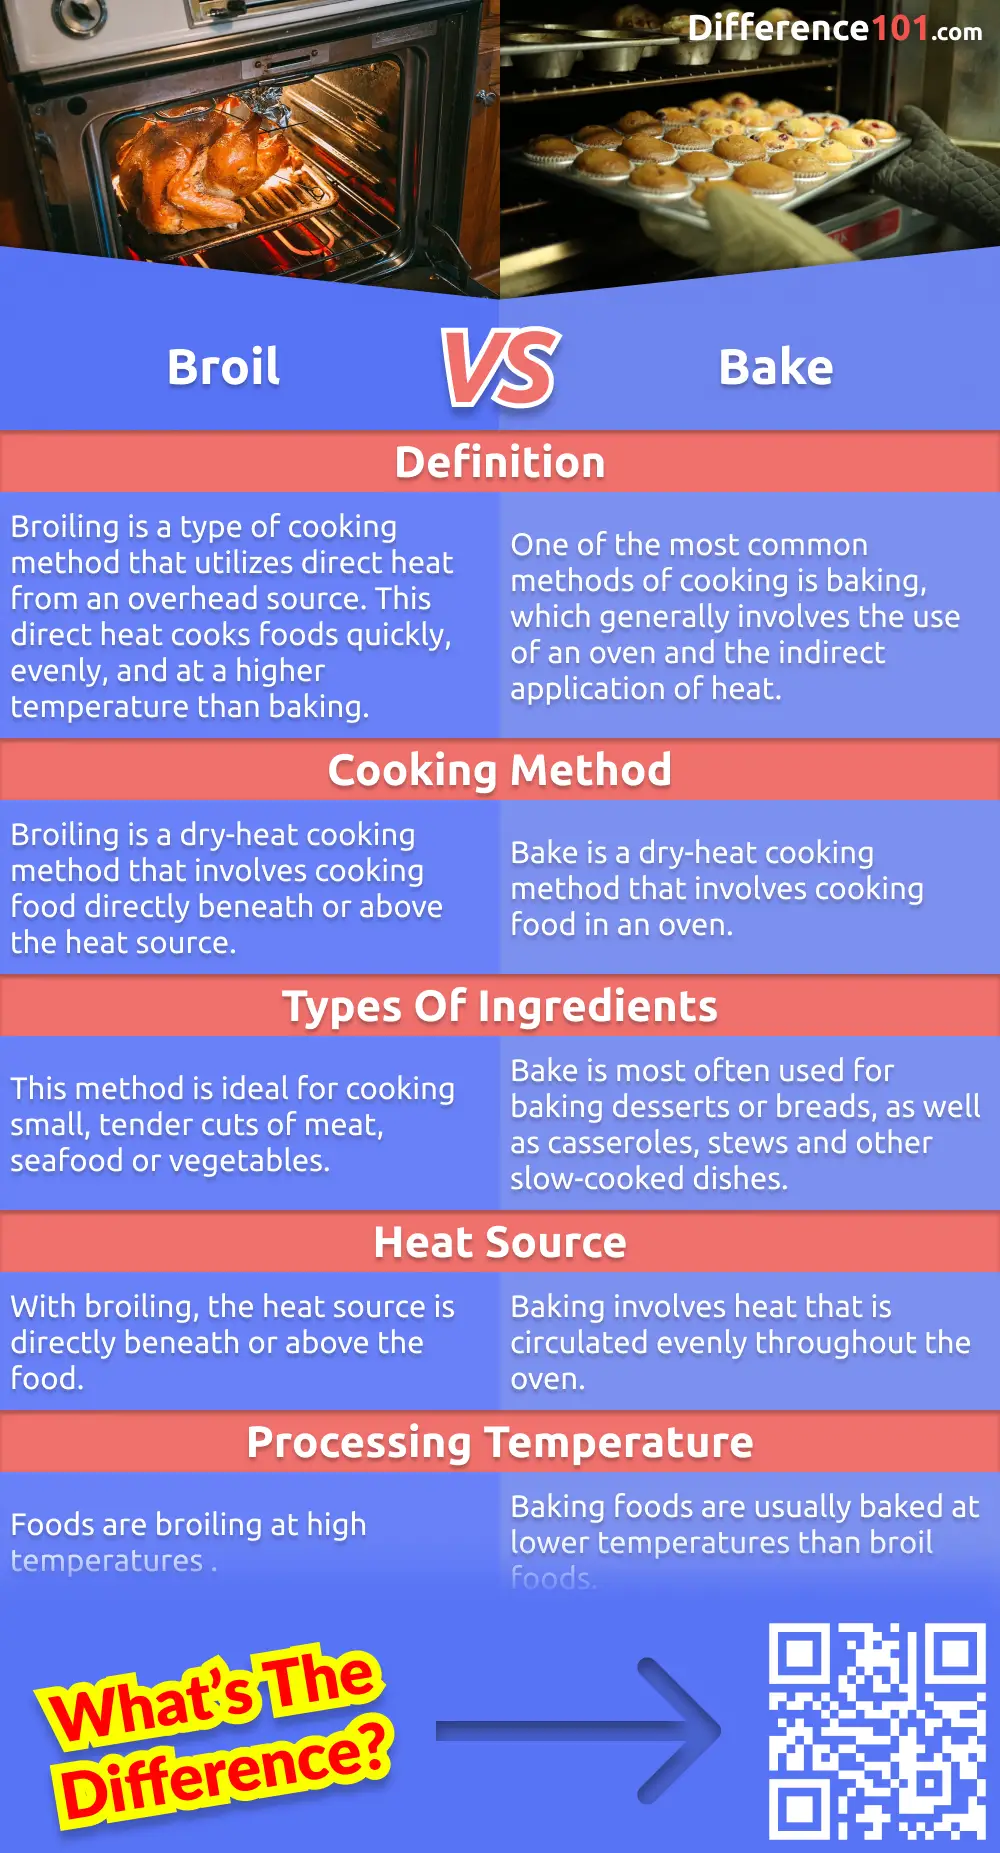 Broil and bake are often used interchangeably, but there are some key differences. Learn about the differences between these two cooking methods, as well as the pros and cons of each. Read more here.